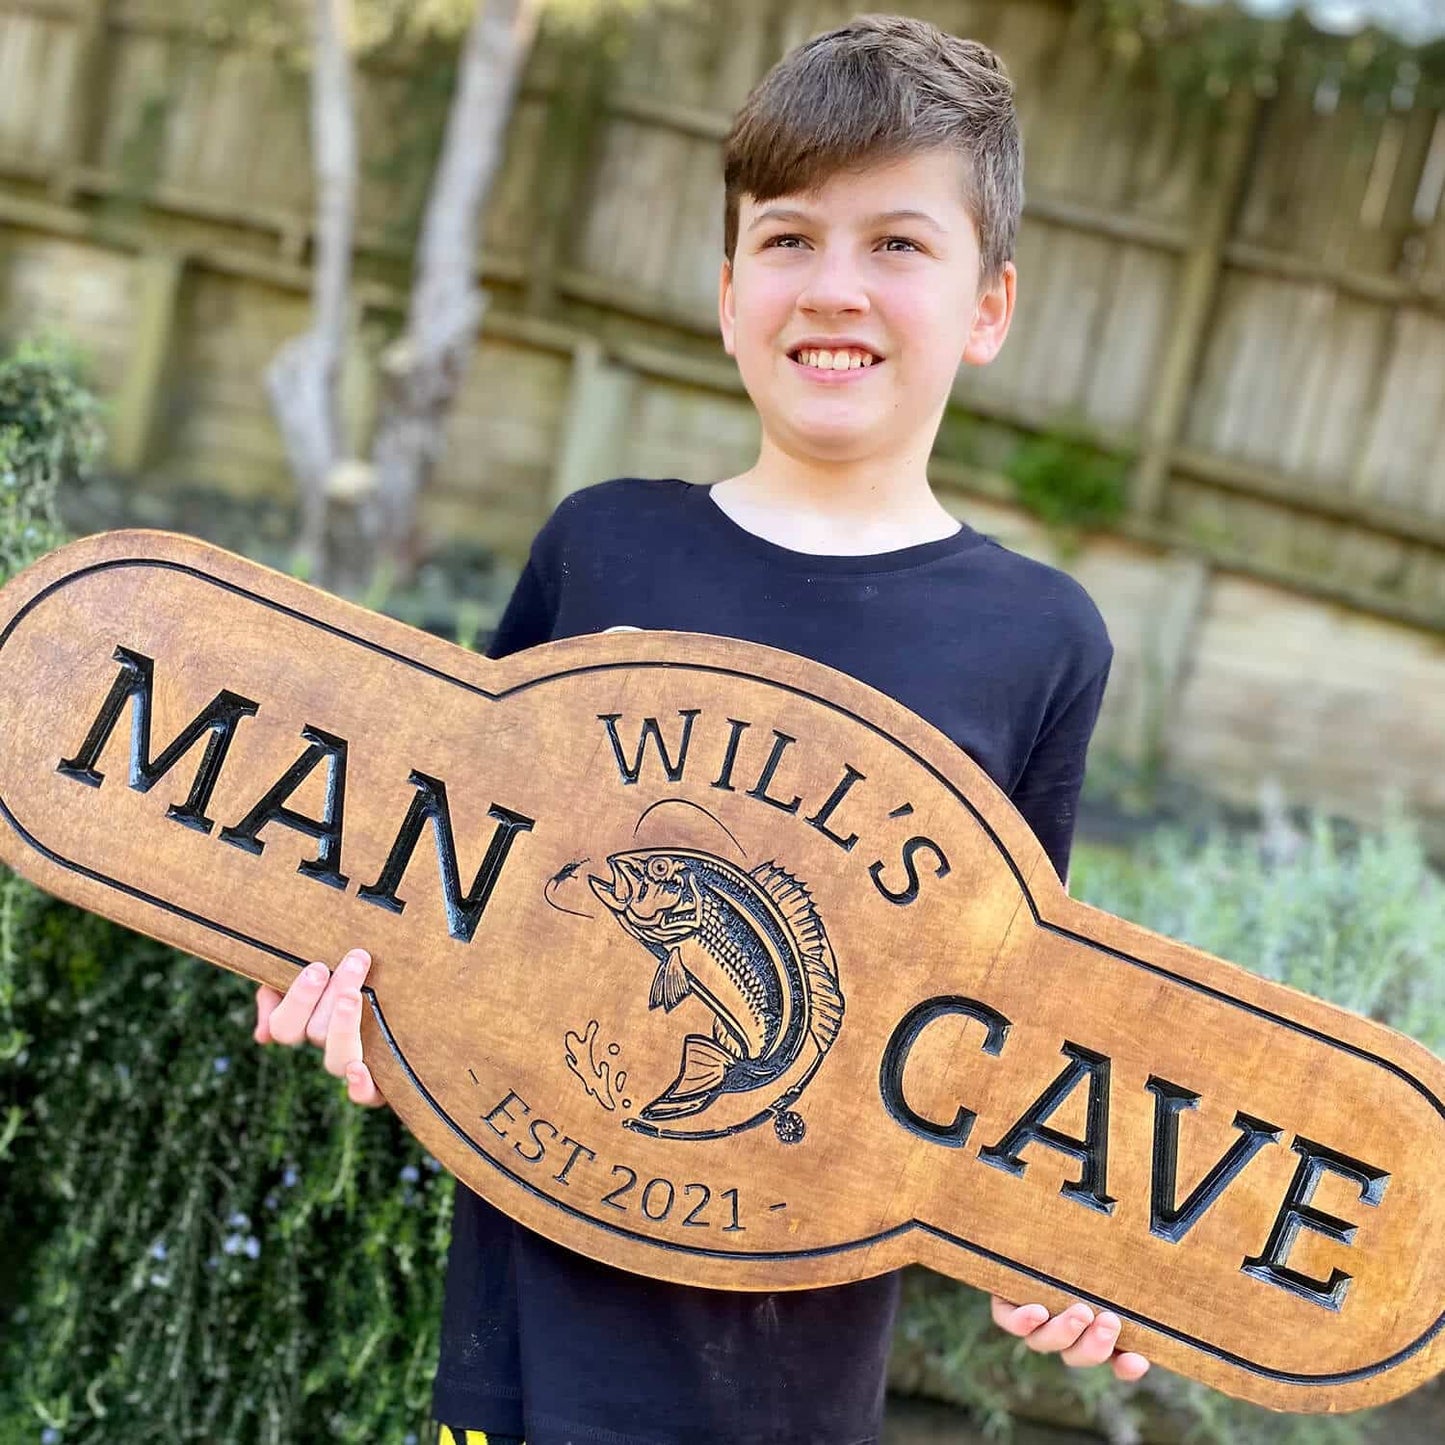 Customisable Mancave Signs